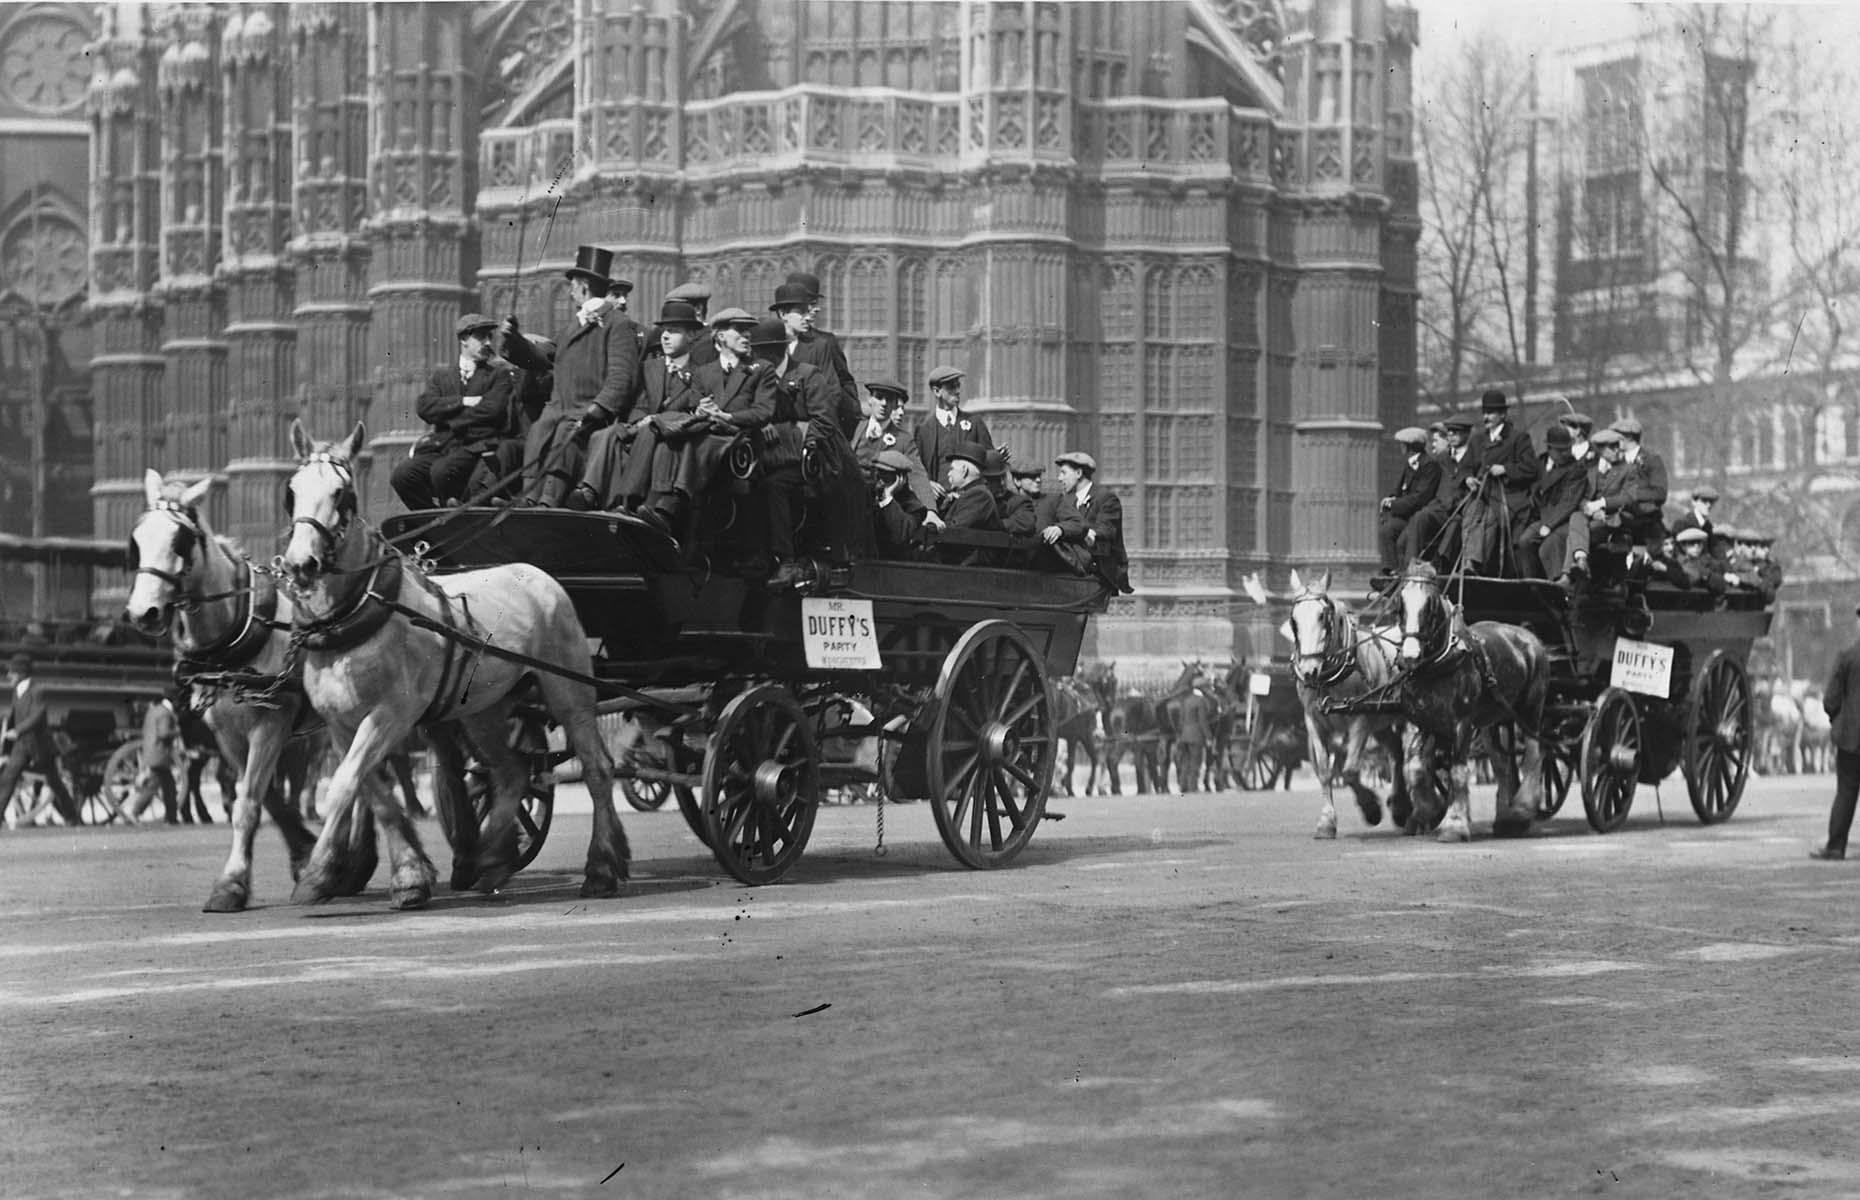 The city already had lots of sights to see, from Piccadilly Circus and Buckingham Palace to the Houses of Parliament and the Tower of London, so day trips taking in top attractions took off very early on. Sightseeing tours like this one in 1912 on an open-top carriage passing by Westminster Abbey, ran from almost every mainline city terminus, including Paddington and Waterloo. Much like the London sightseeing buses of today, tours looped around the city's most famous locations.